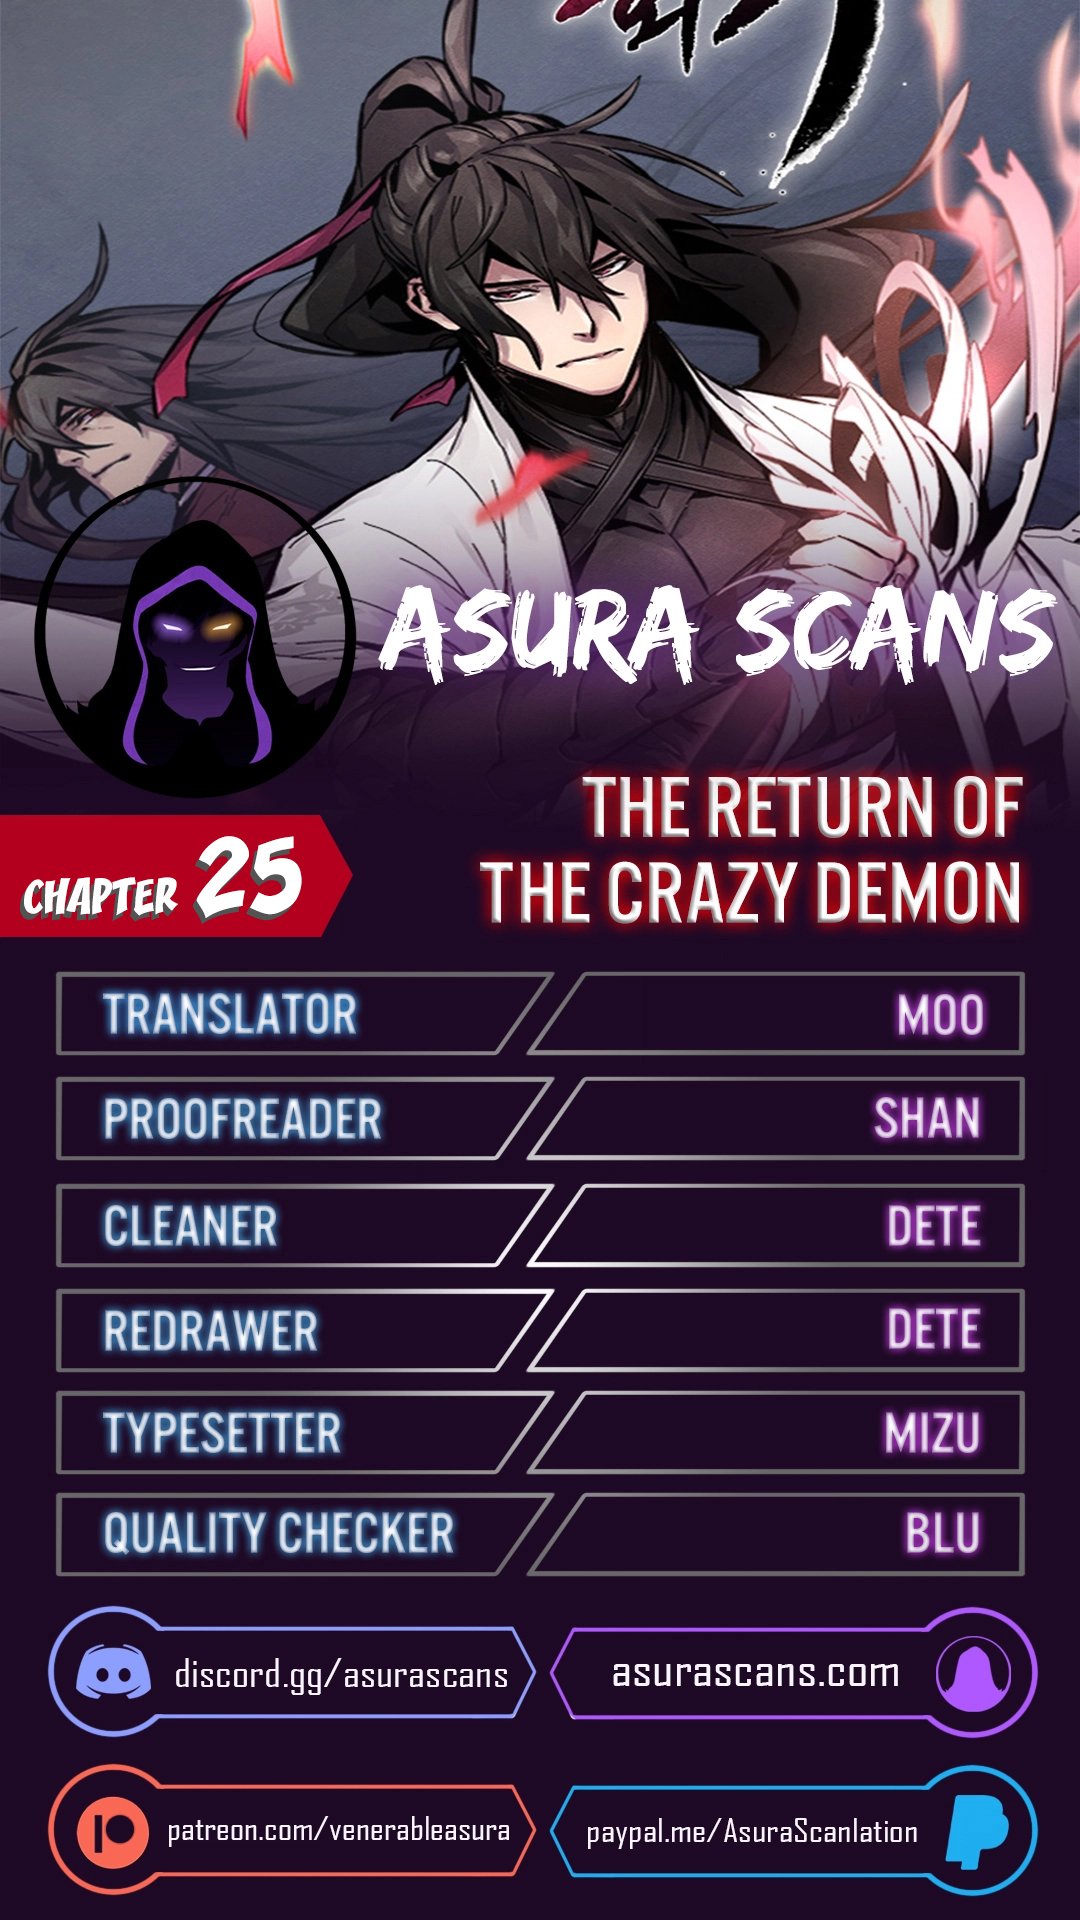 The Return of the Crazy Demon - Chapter 18566 - Image 1